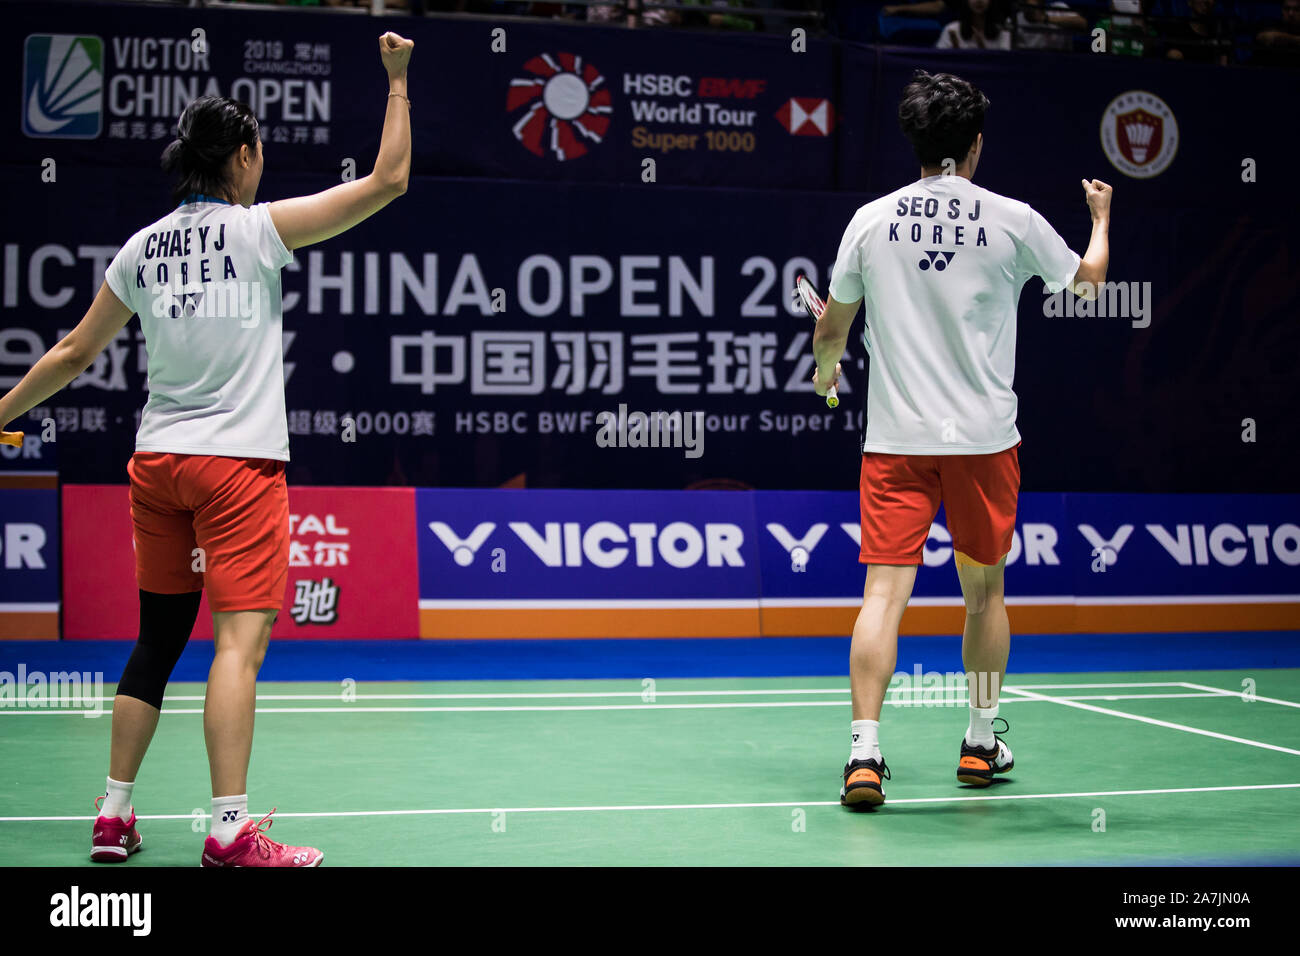 South Korean professional badminton players Seo Seung-jae and Chae Yoo-jung compete against Japanese professional badminton players Yuta Watanabe and Stock Photo